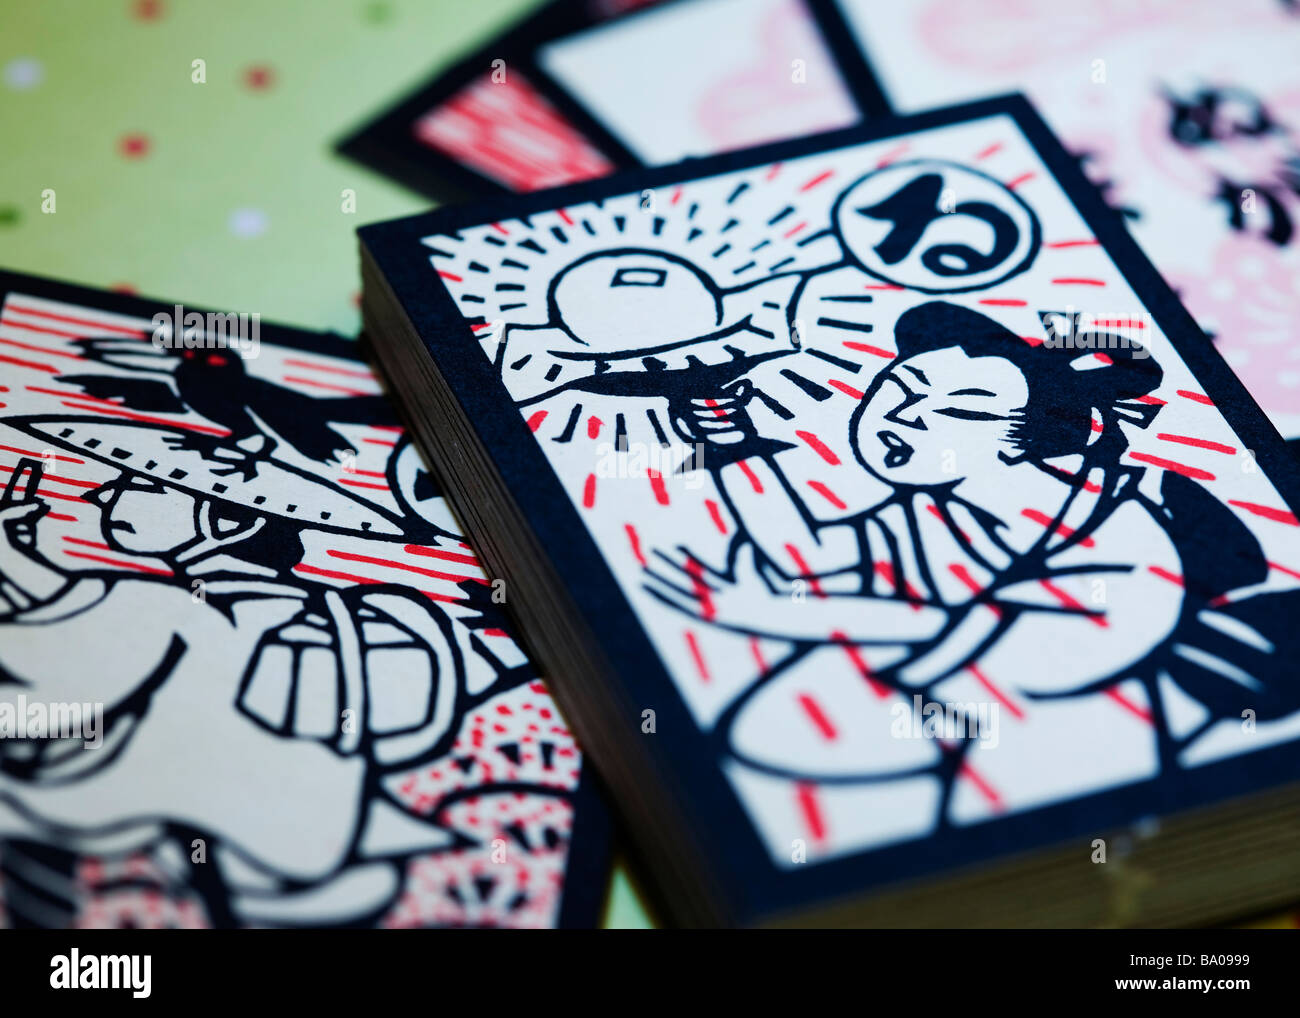 Japanese playing cards Stock Photo